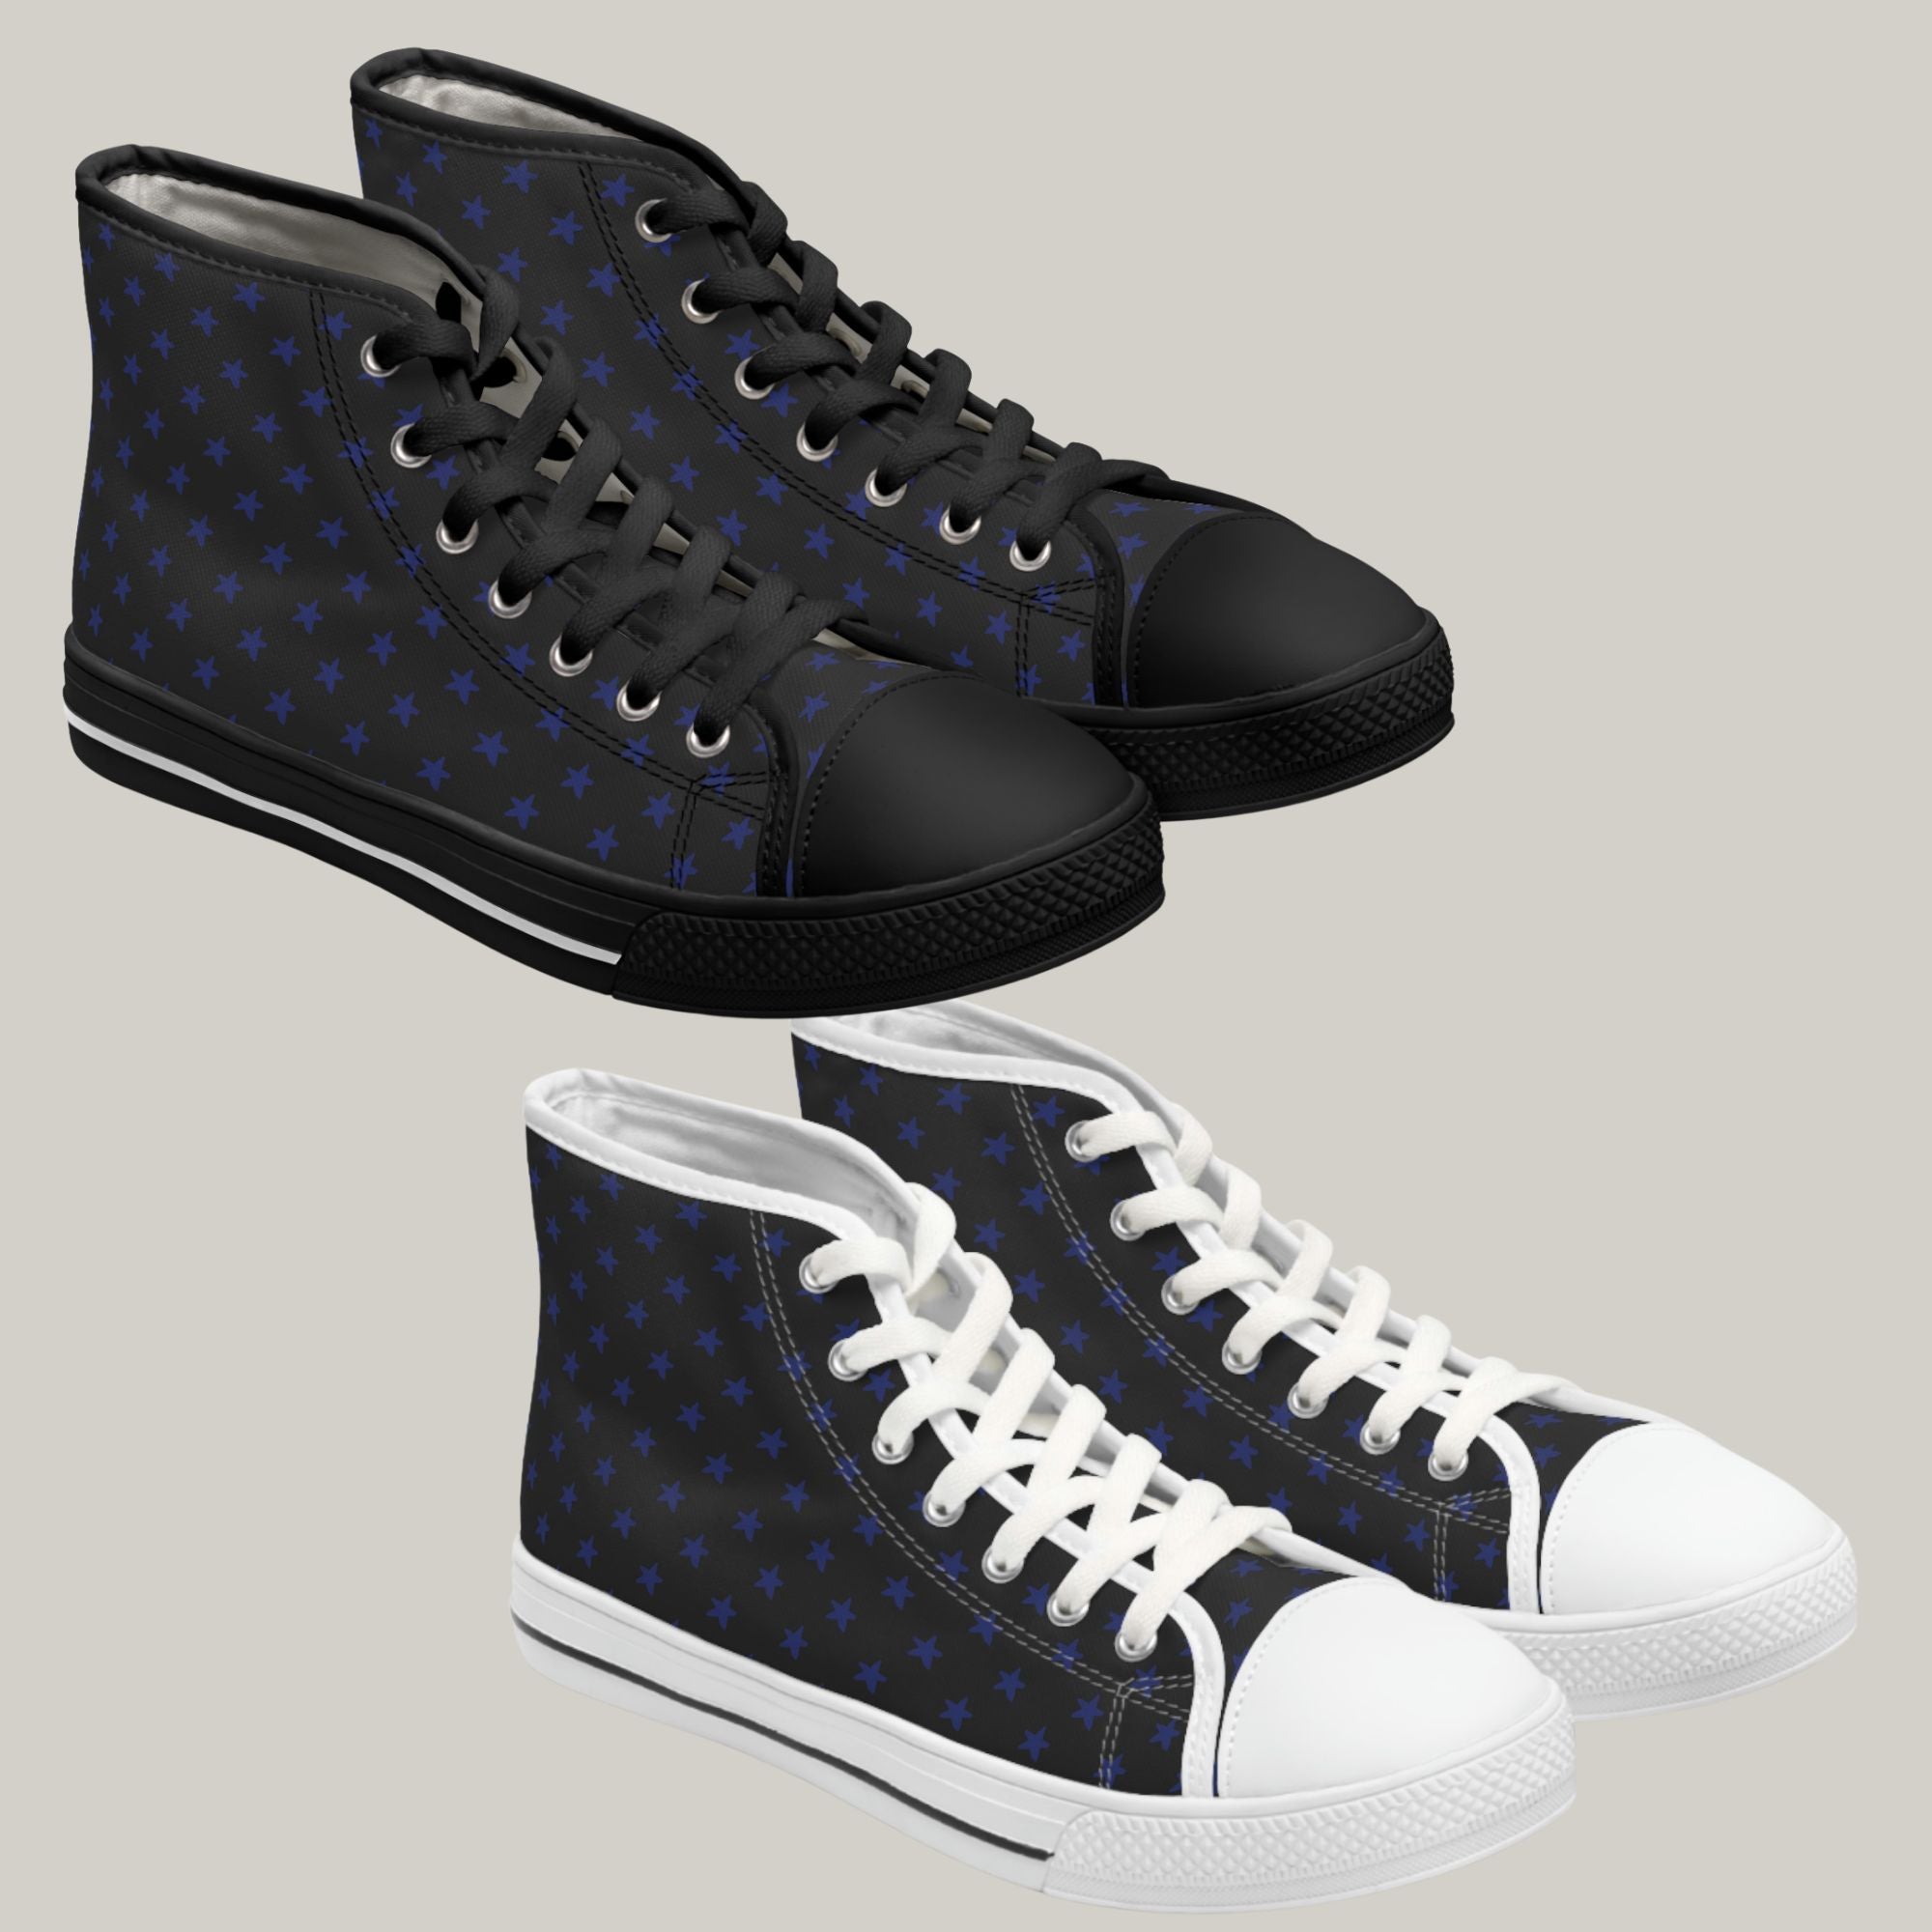 MY STARS NAVY & BLACK - Women's High Top Sneakers Black and White Soles